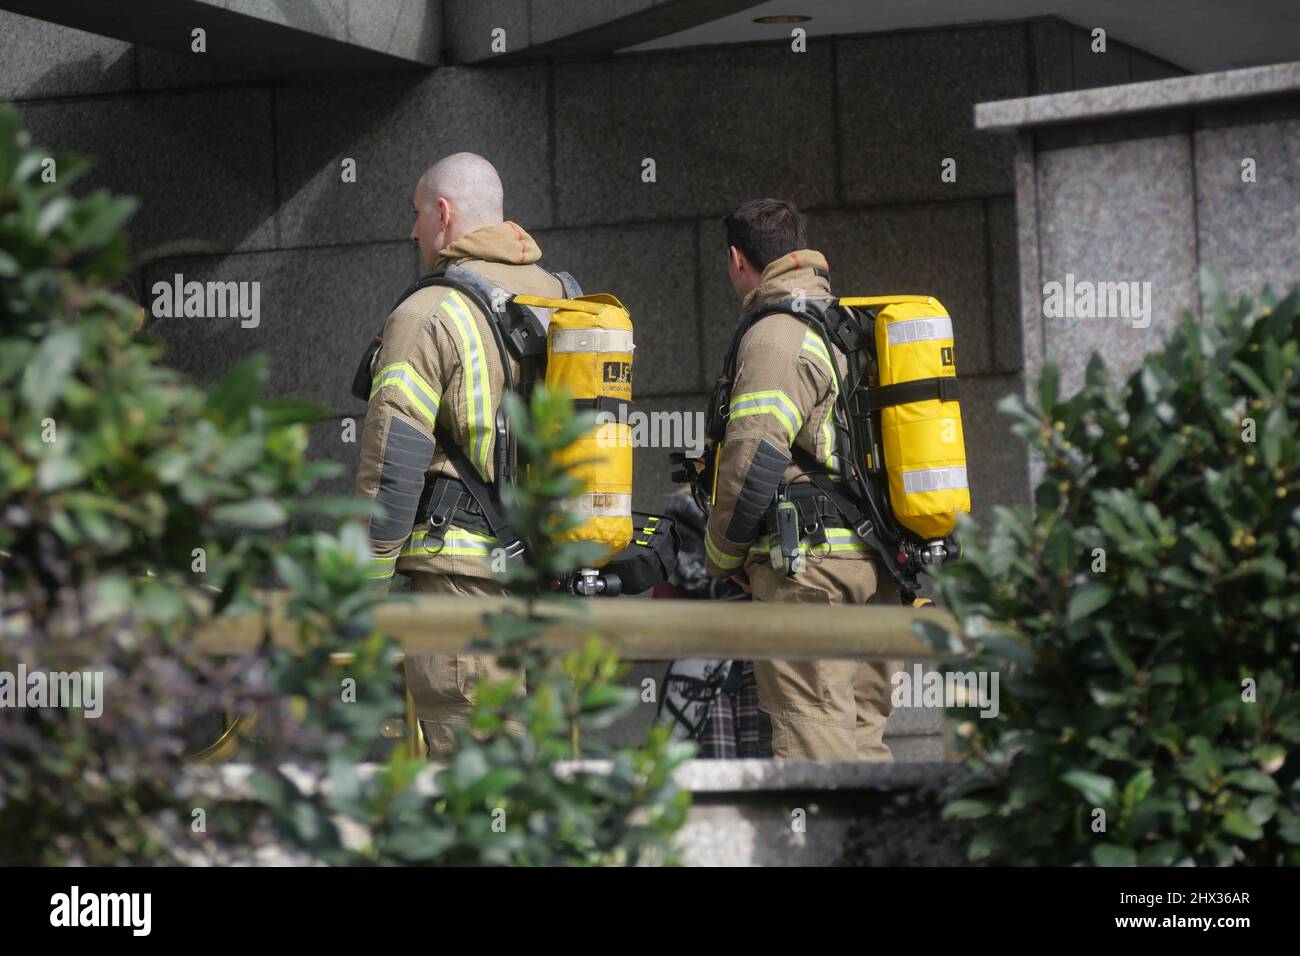 London, UK. 9th Mar, 2022. Over 8 fire engines turn up at fire incident at Royal Garden Hotel, Kensington. Credit: Brian Minkoff/Alamy Live News Stock Photo